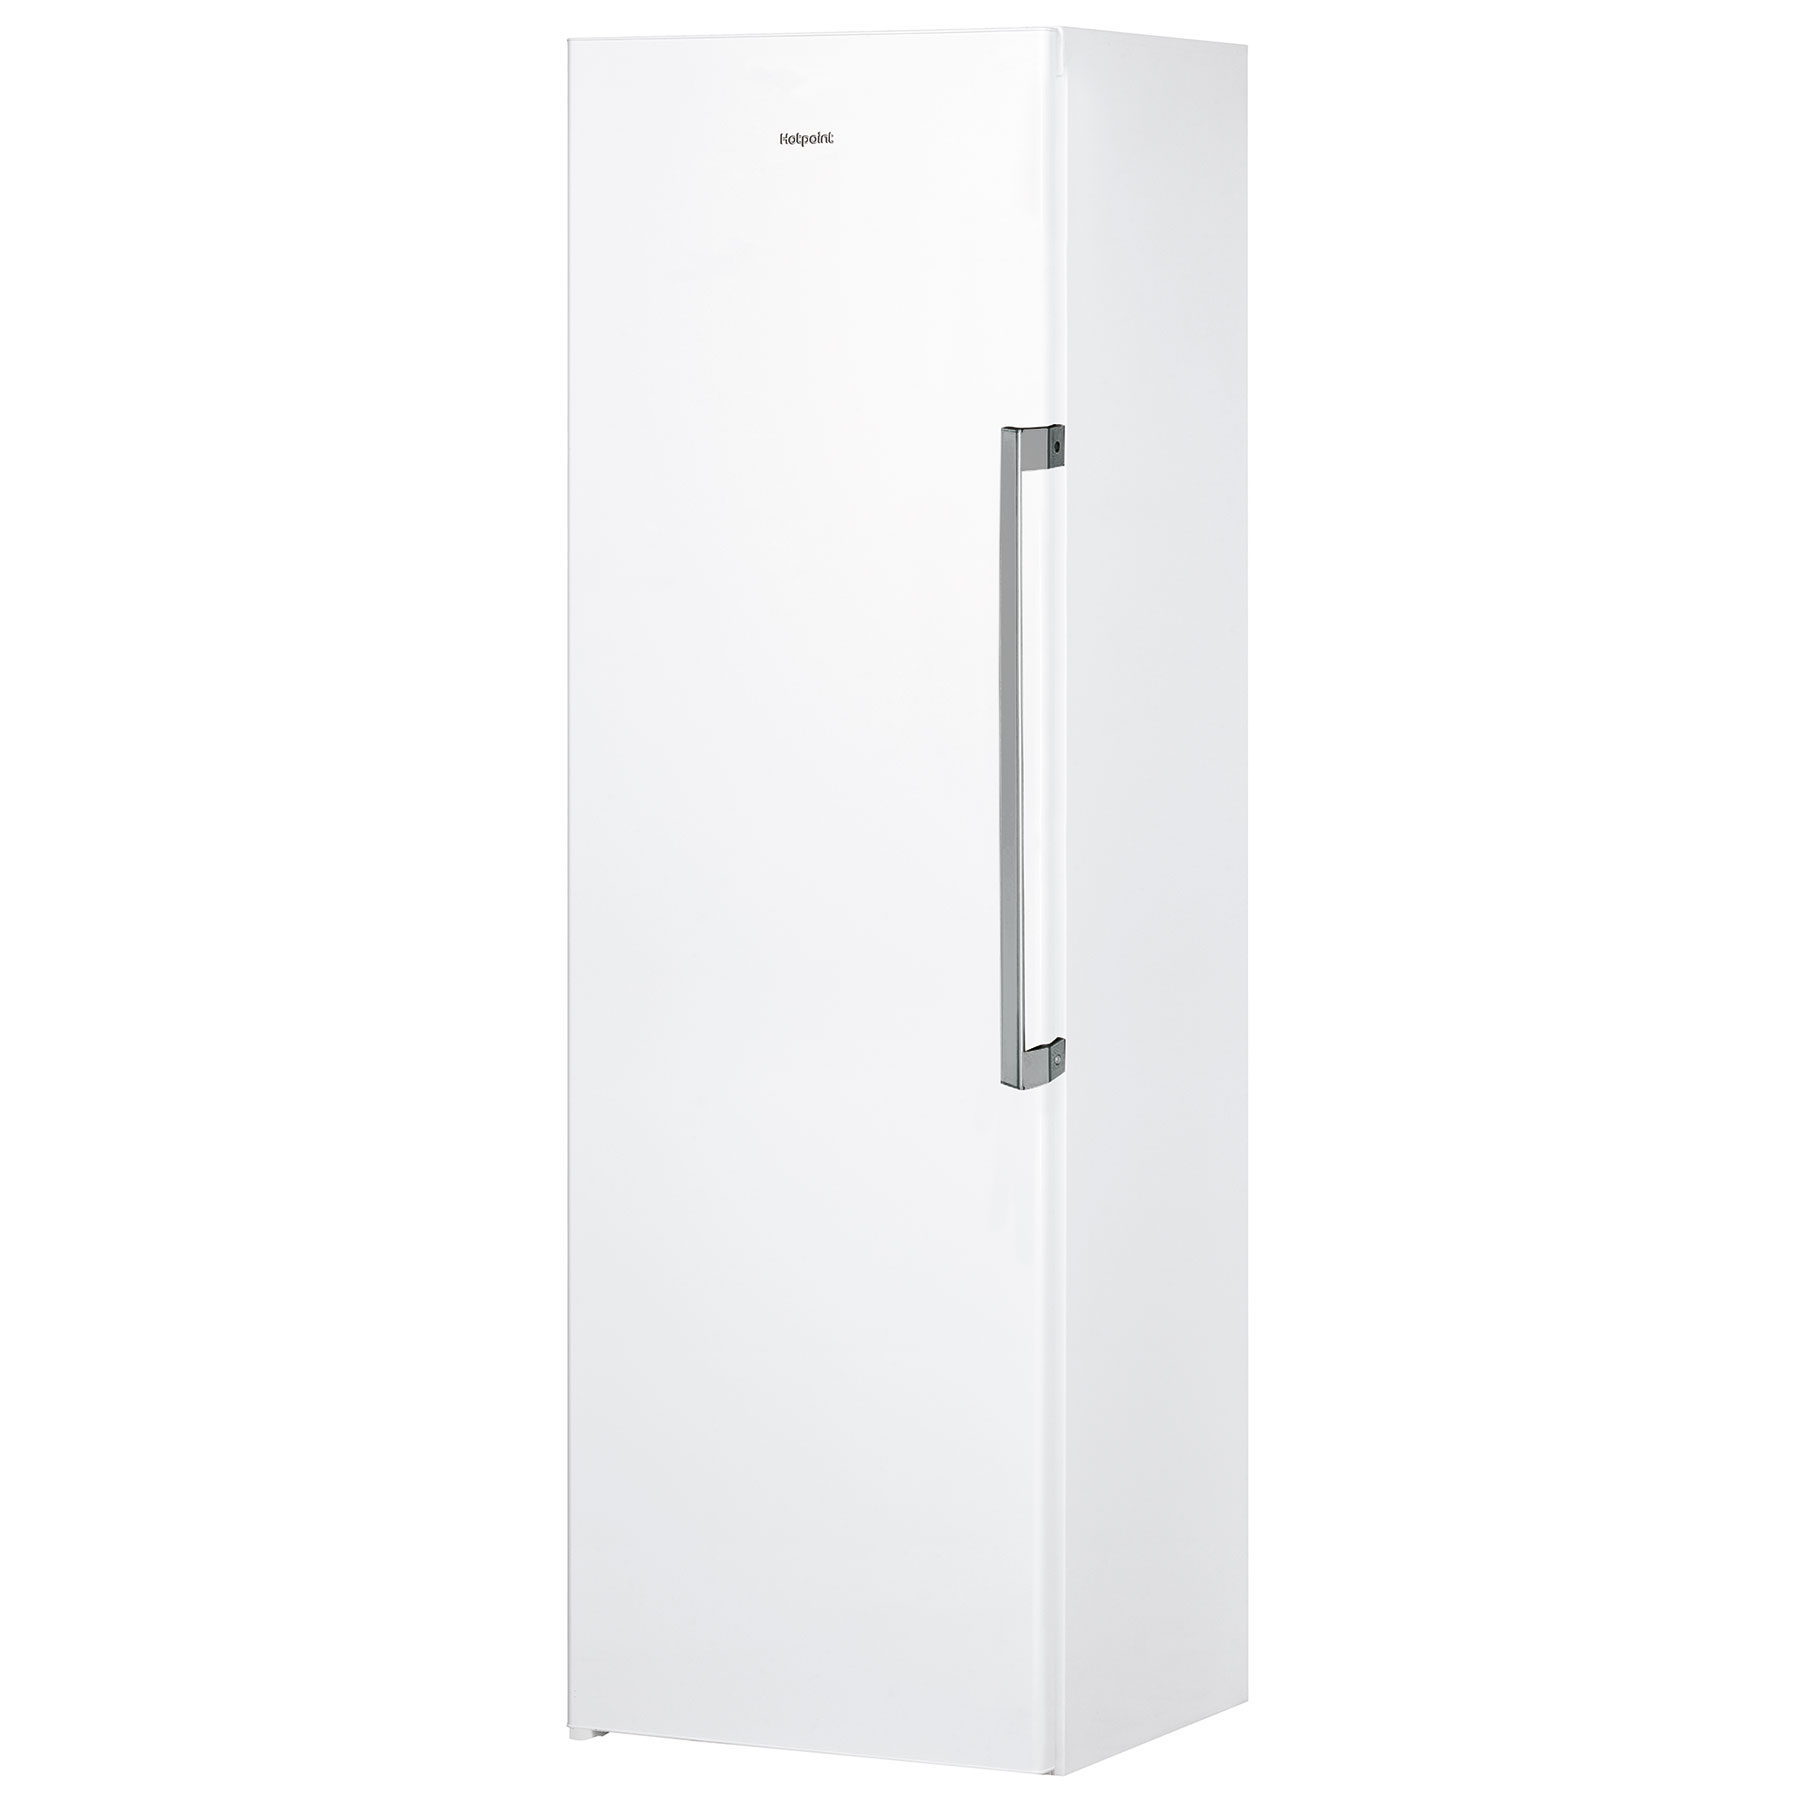 Image of Hotpoint UH8F2CW 60cm Tall Frost Free Freezer White 1 87m E Rated